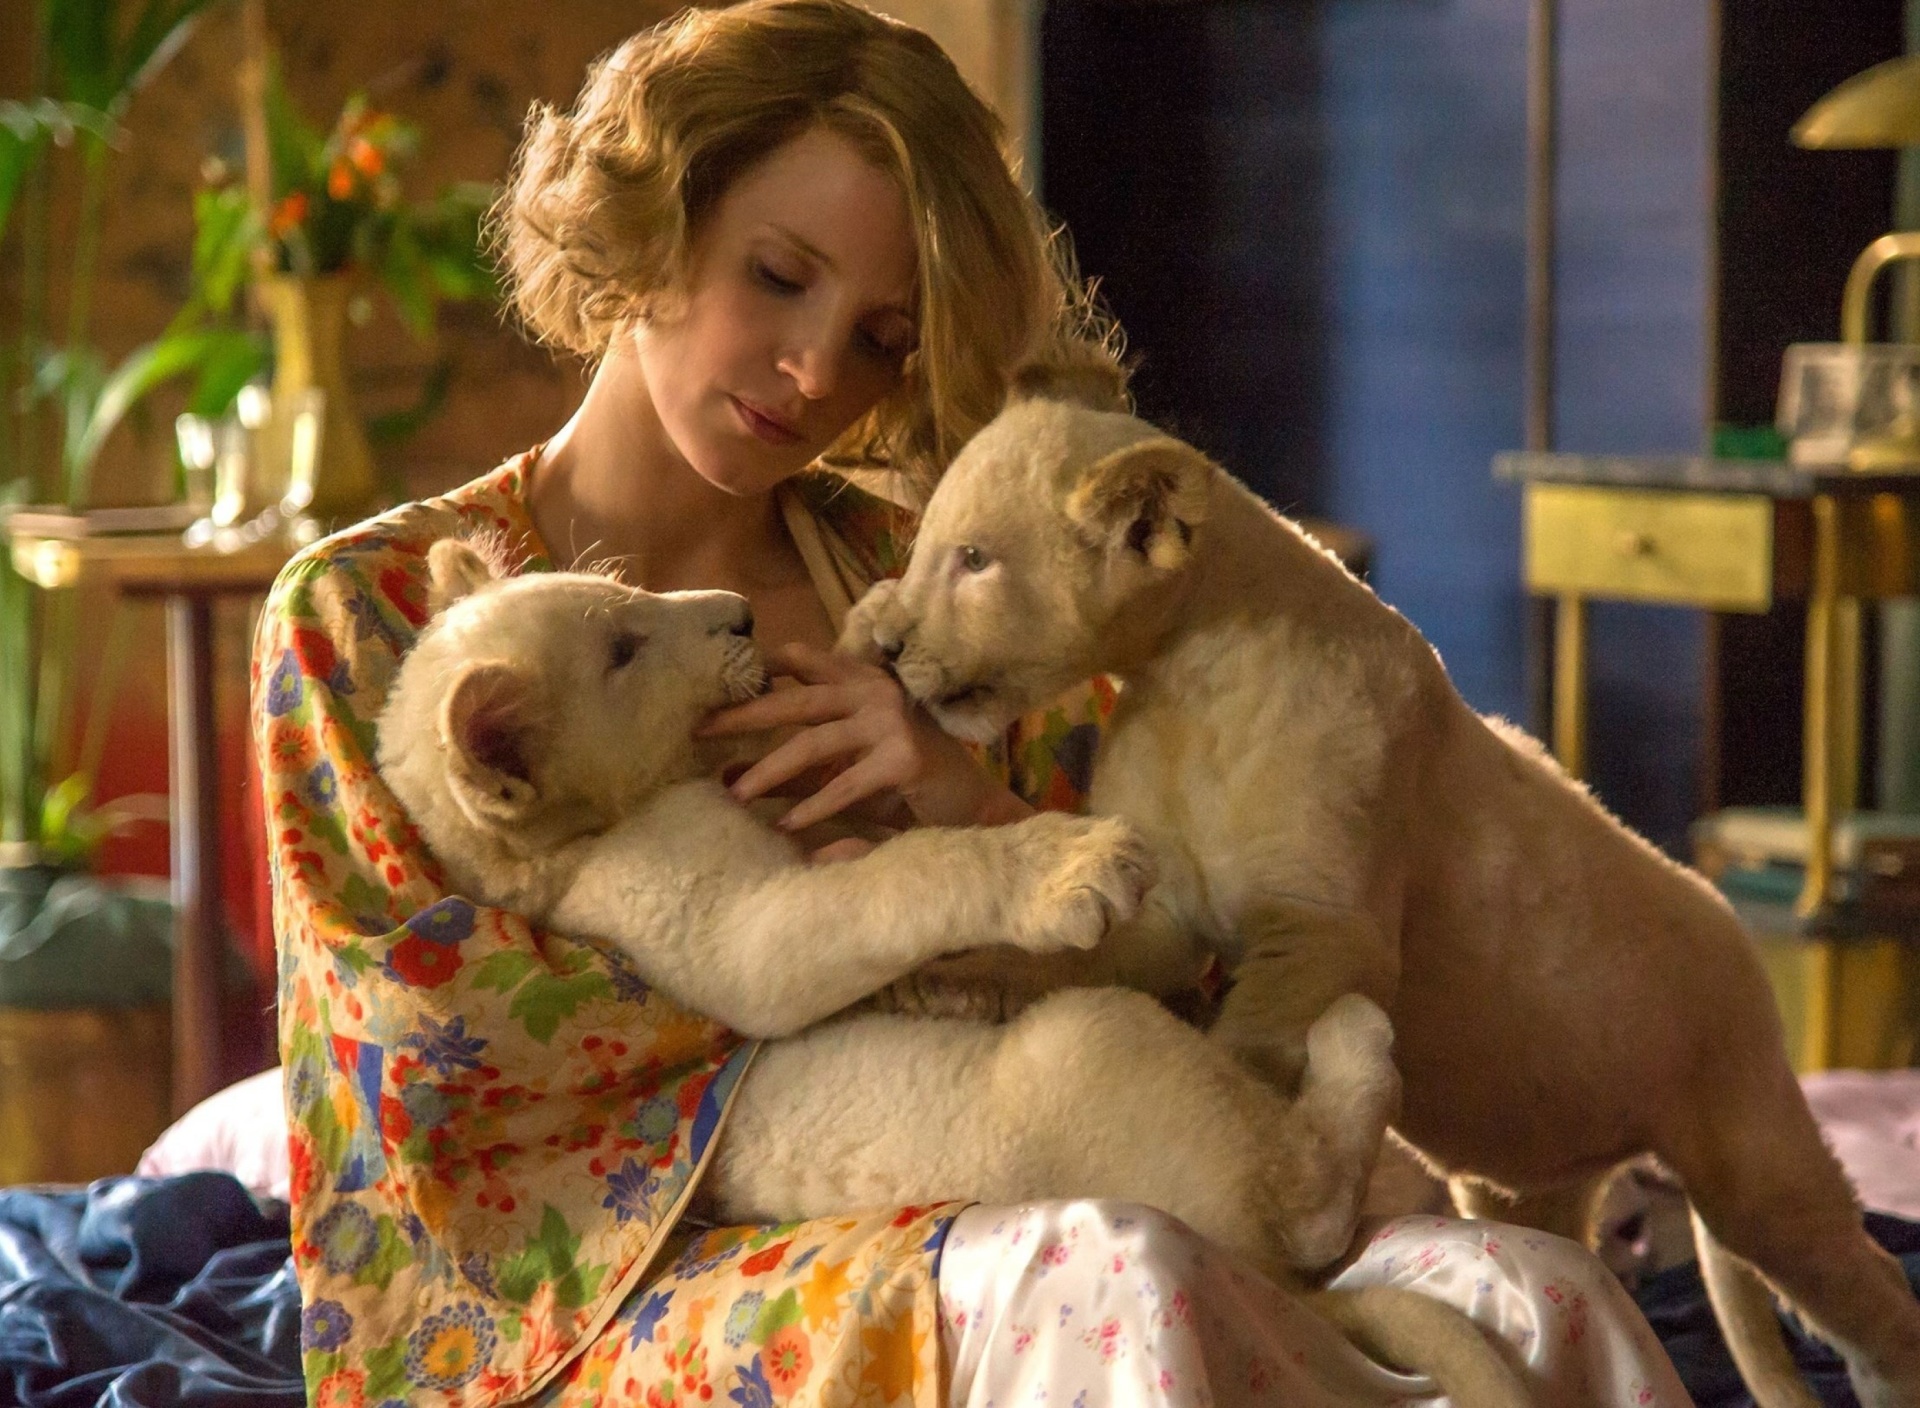 Sfondi The Zookeepers Wife Film with Jessica Chastain 1920x1408